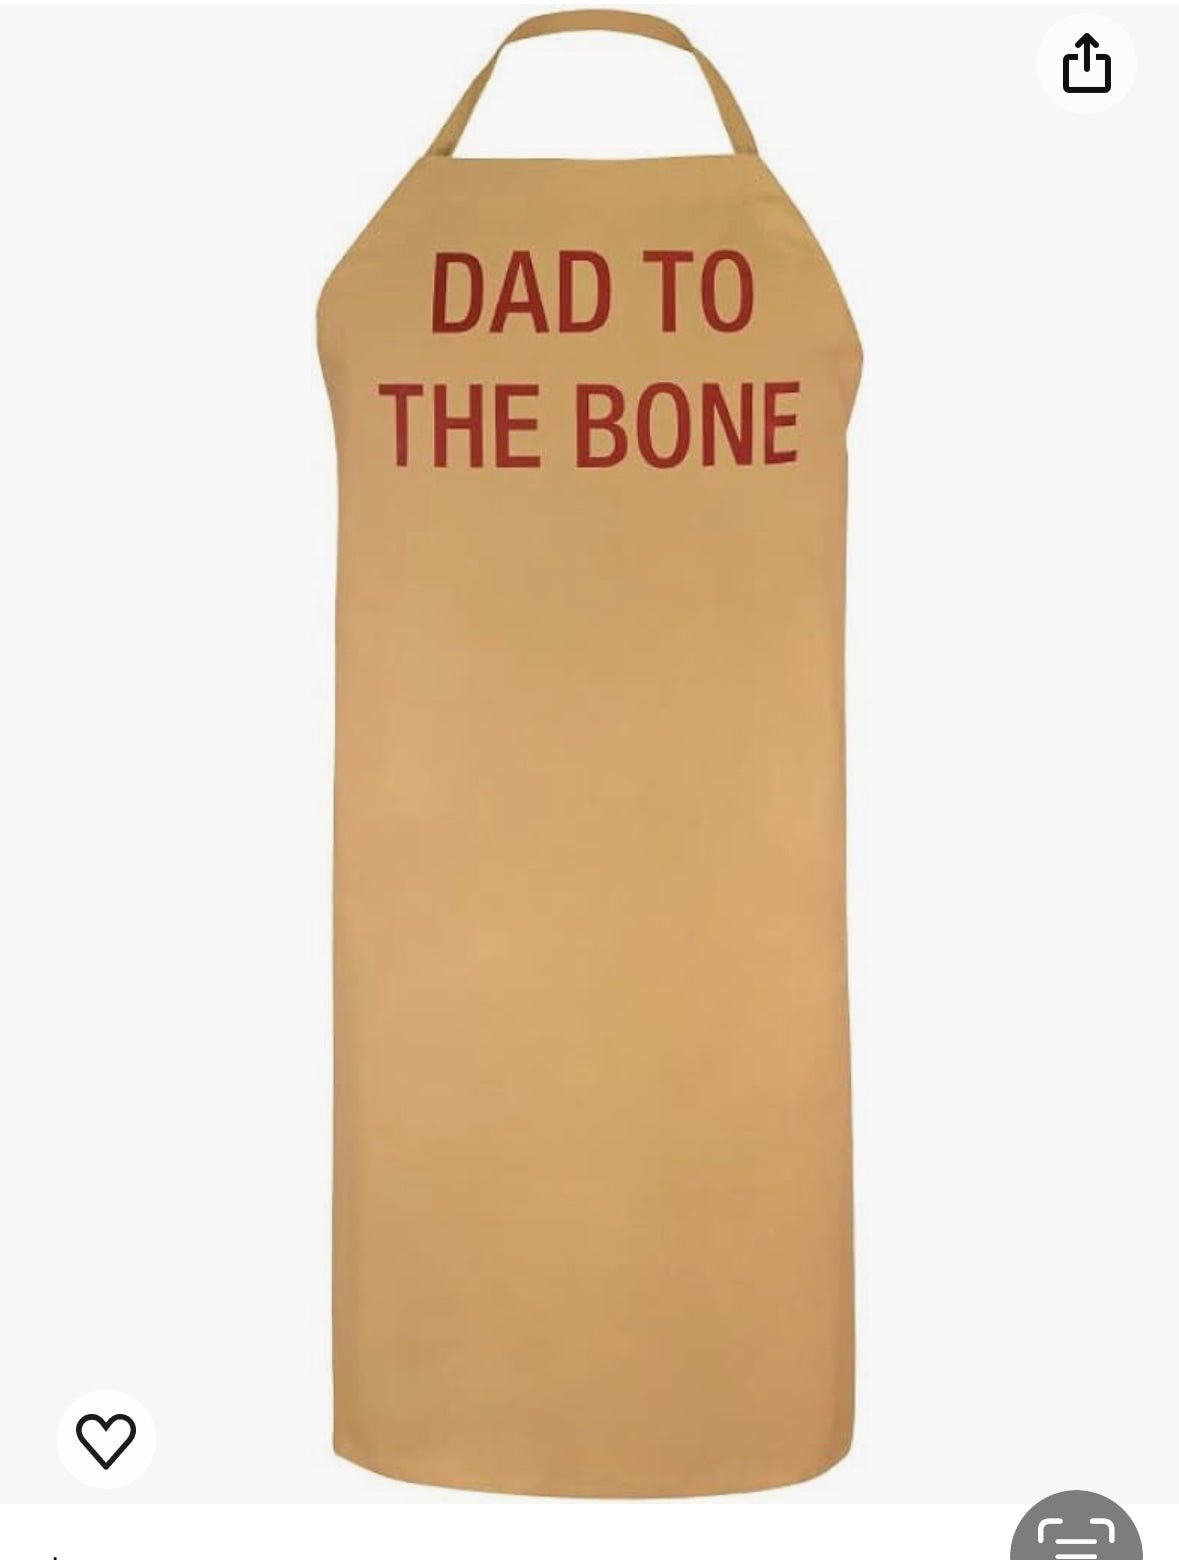 "Dad To The Bone" Long 100% Cotton Apron - Give Dad The Pun He Wants!